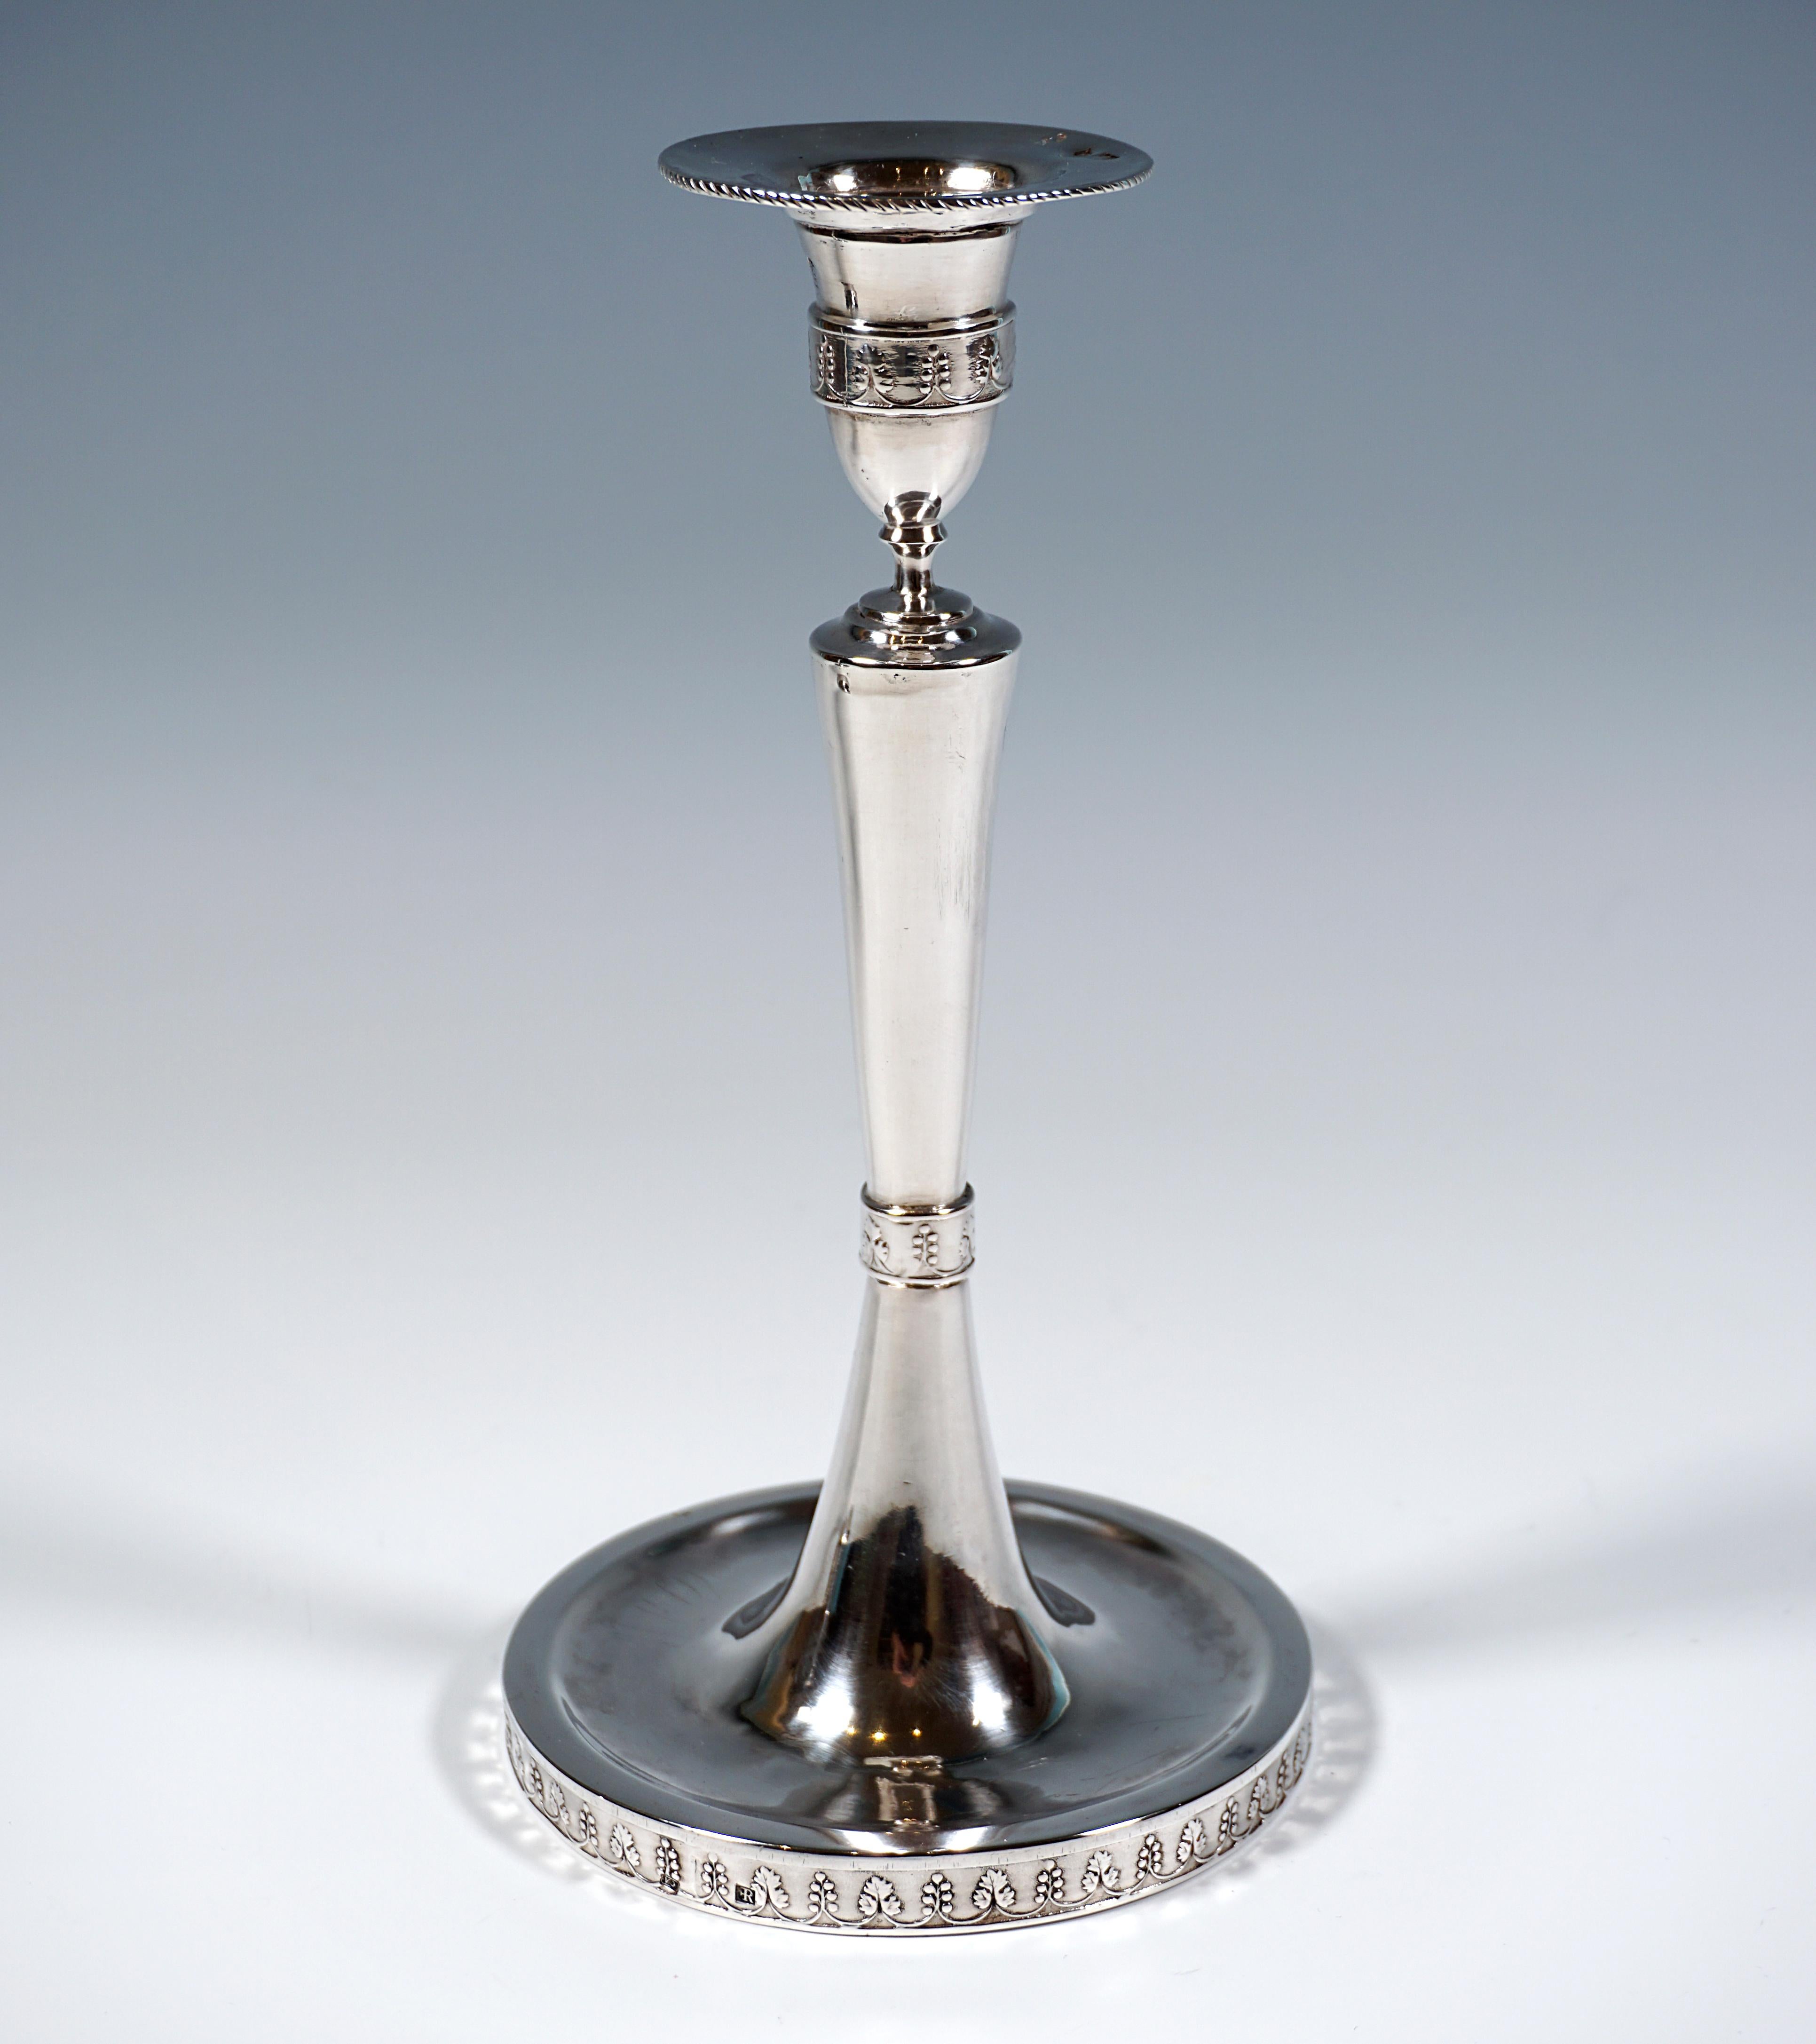 Austrian Pair Of Antique Empire Silver Candle Holders, Johann Kaba Vienna, Dated 1803 For Sale